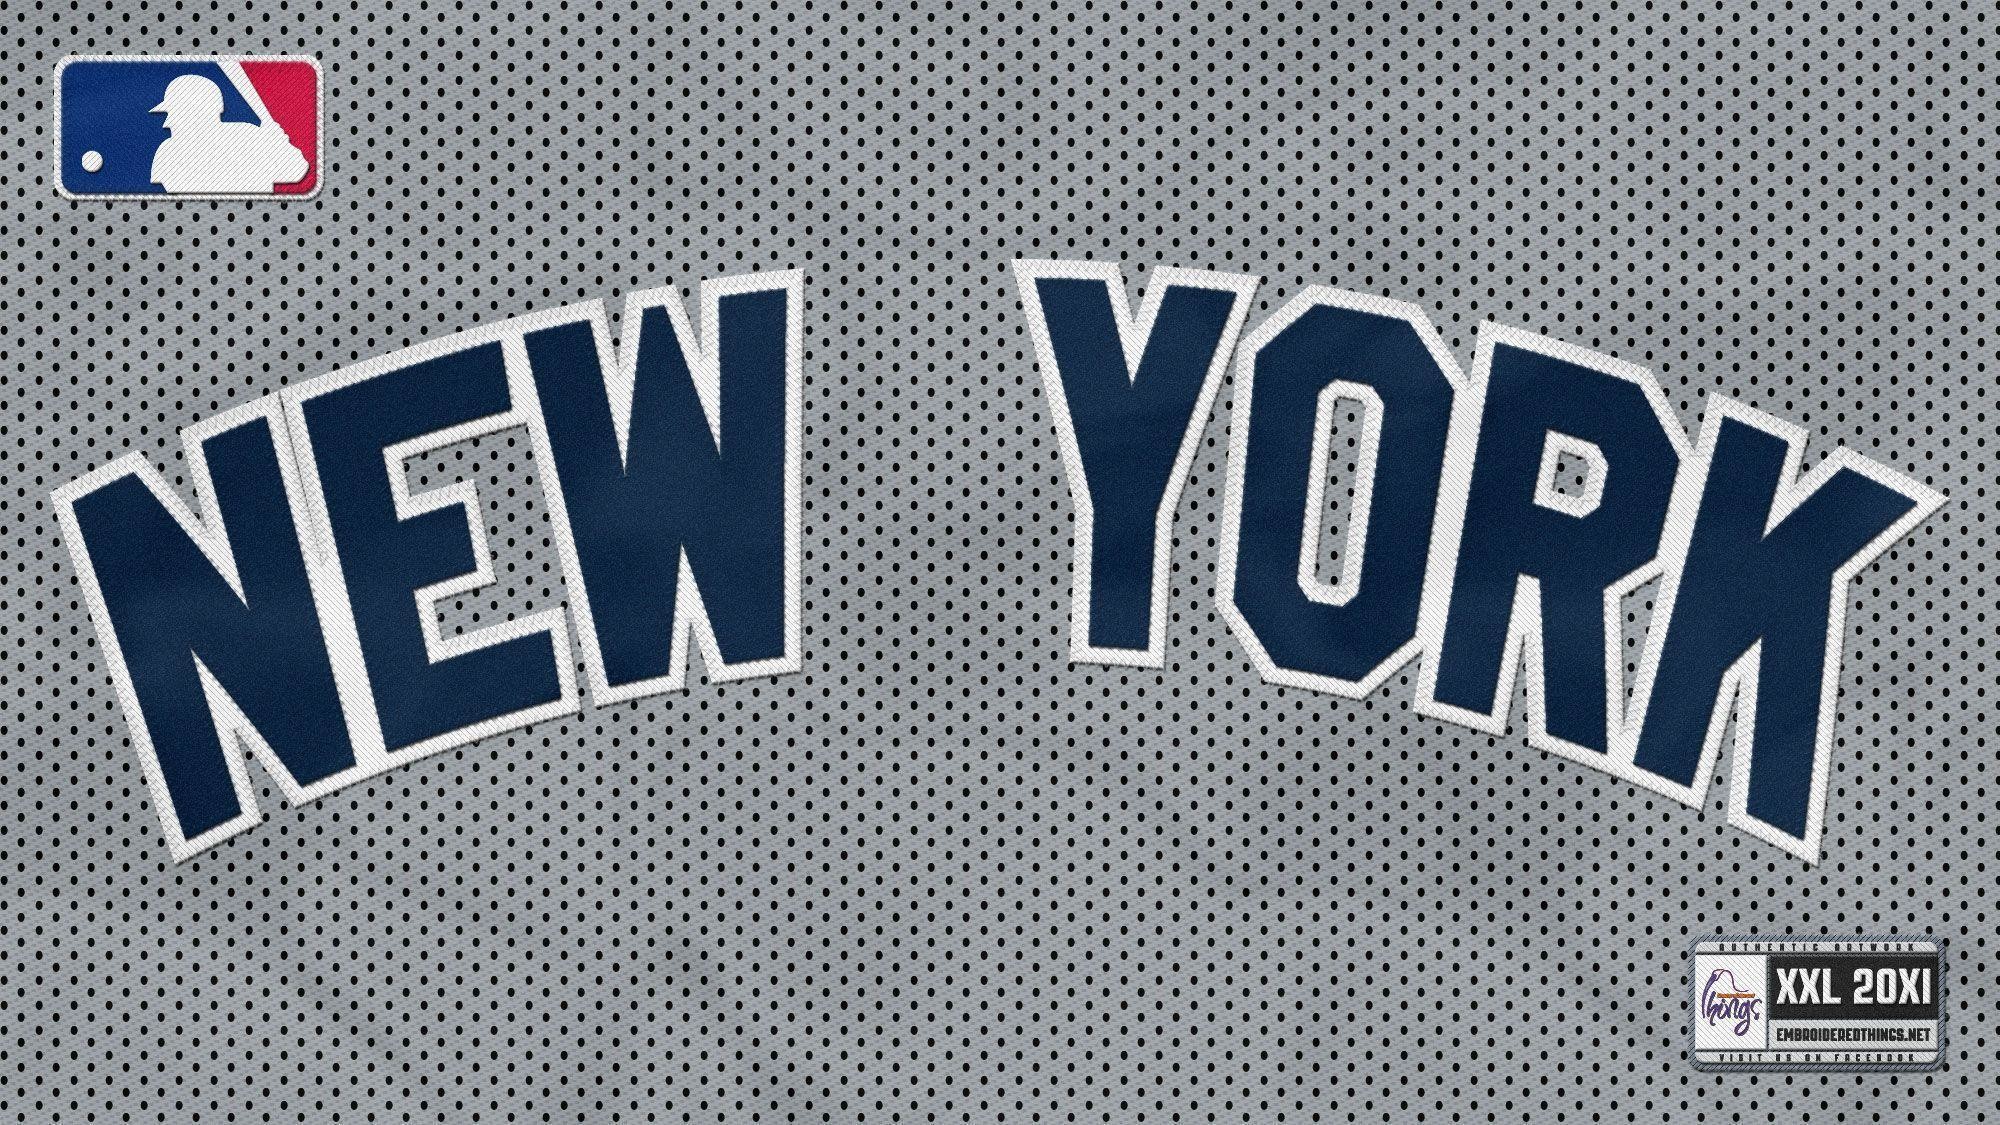 2000x1125 23 New York Yankees Wallpapers | New York Yankees Backgrounds